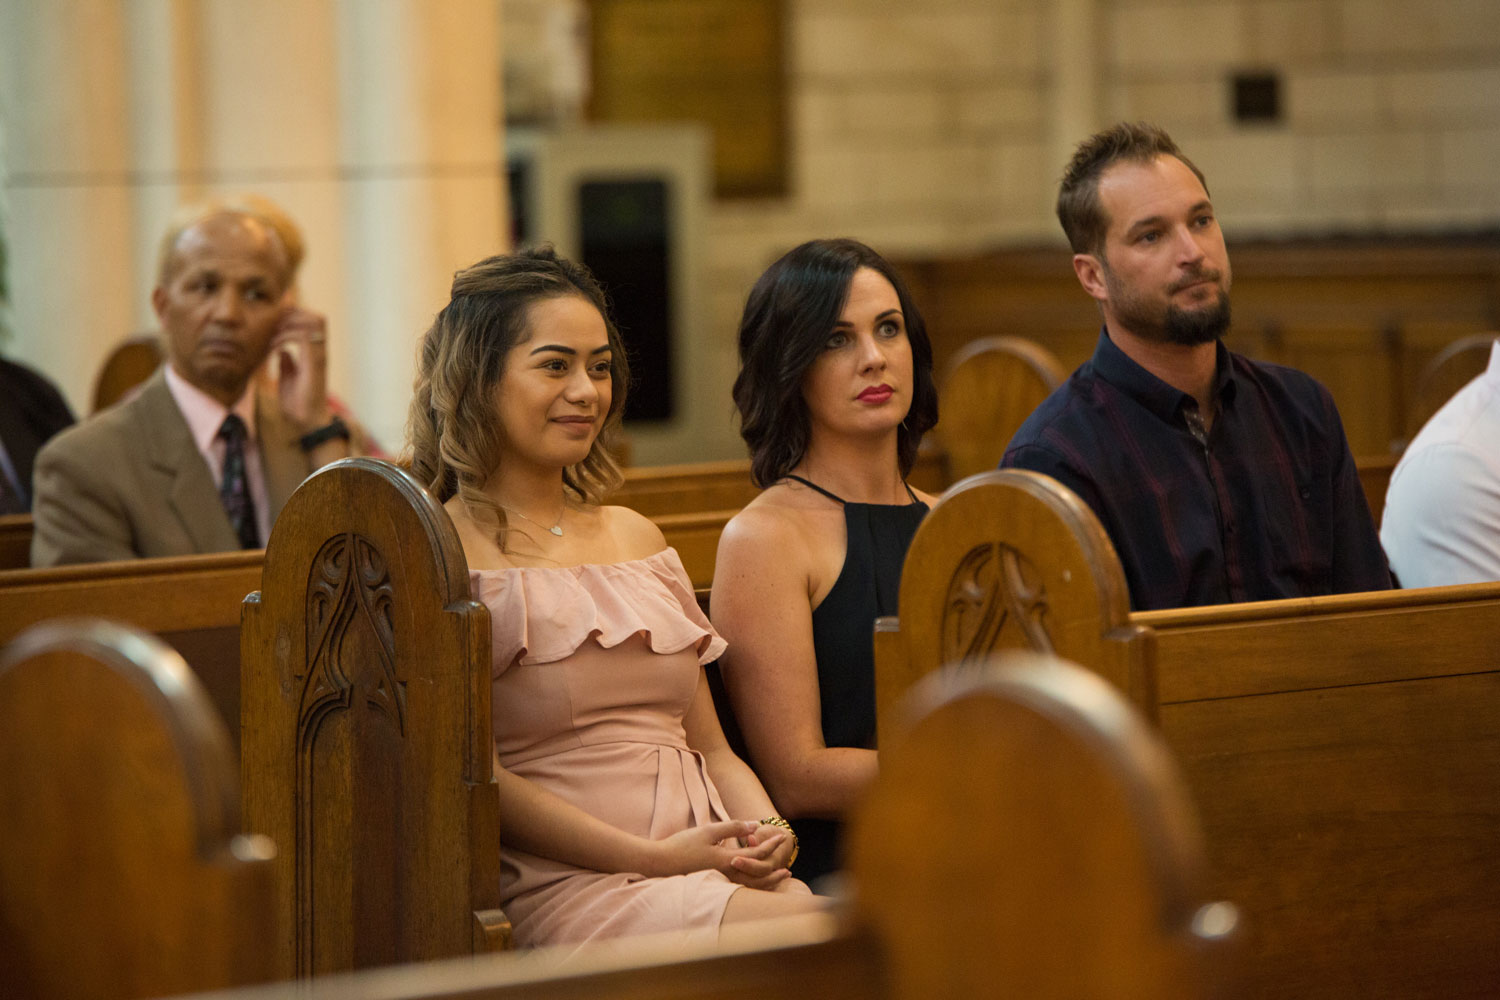 auckland wedding guest smiling in church